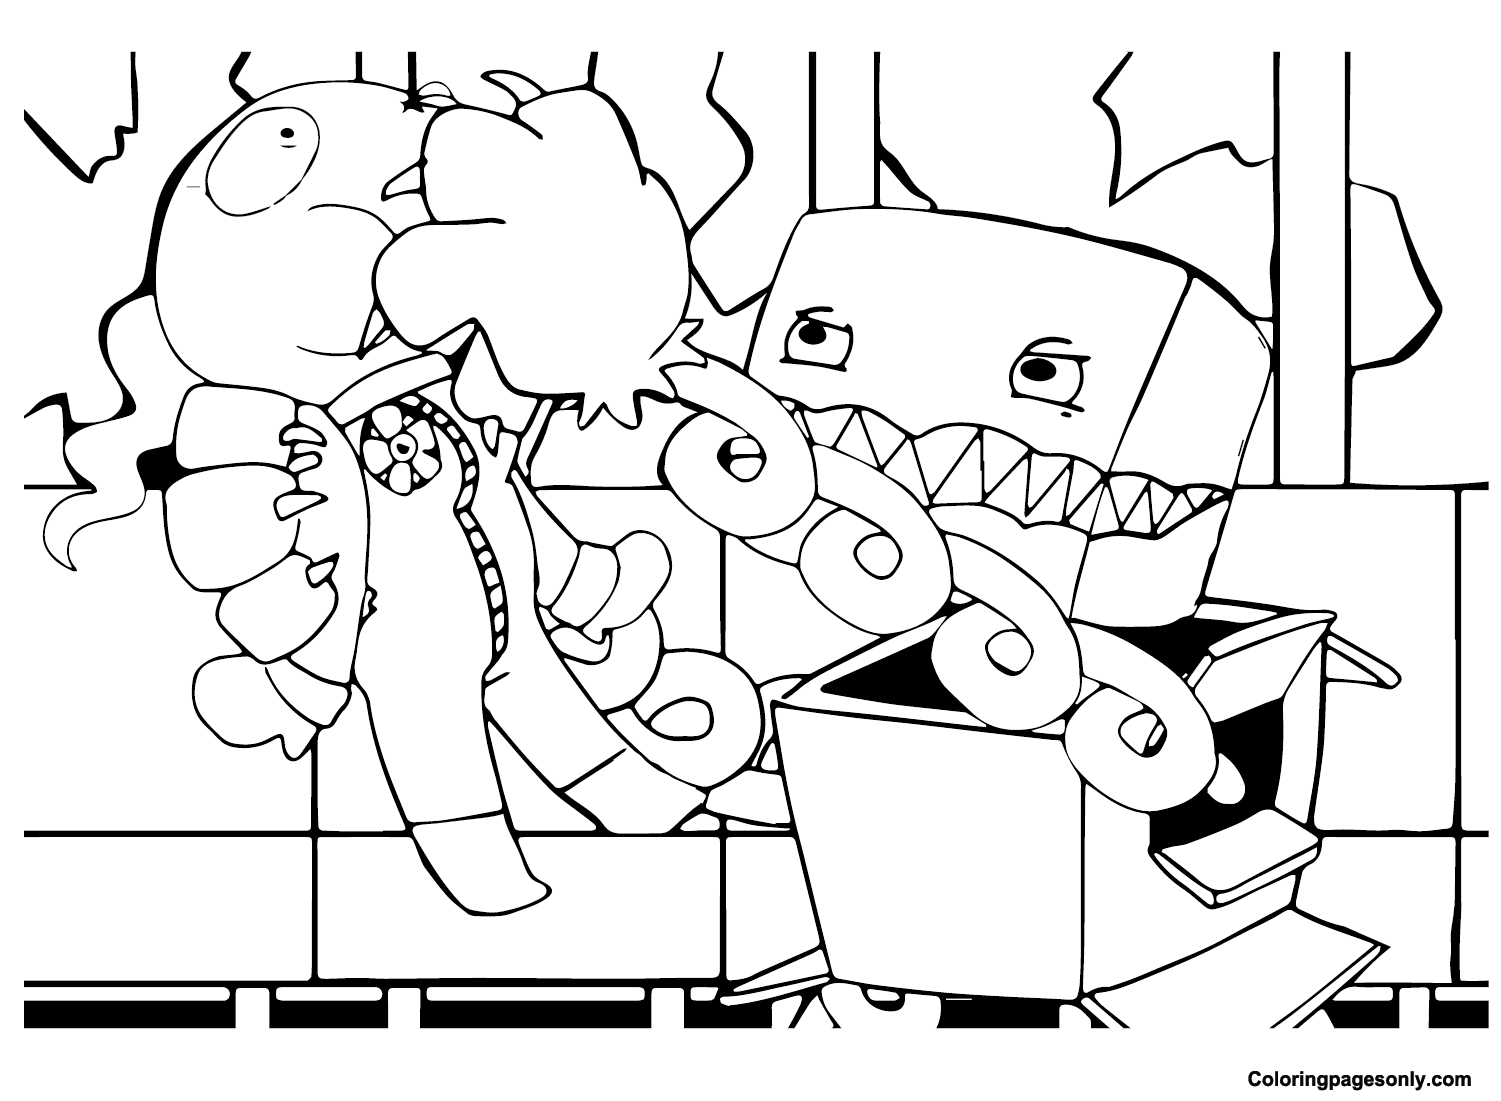 Boxy Boo from Project Playtime Coloring Pages